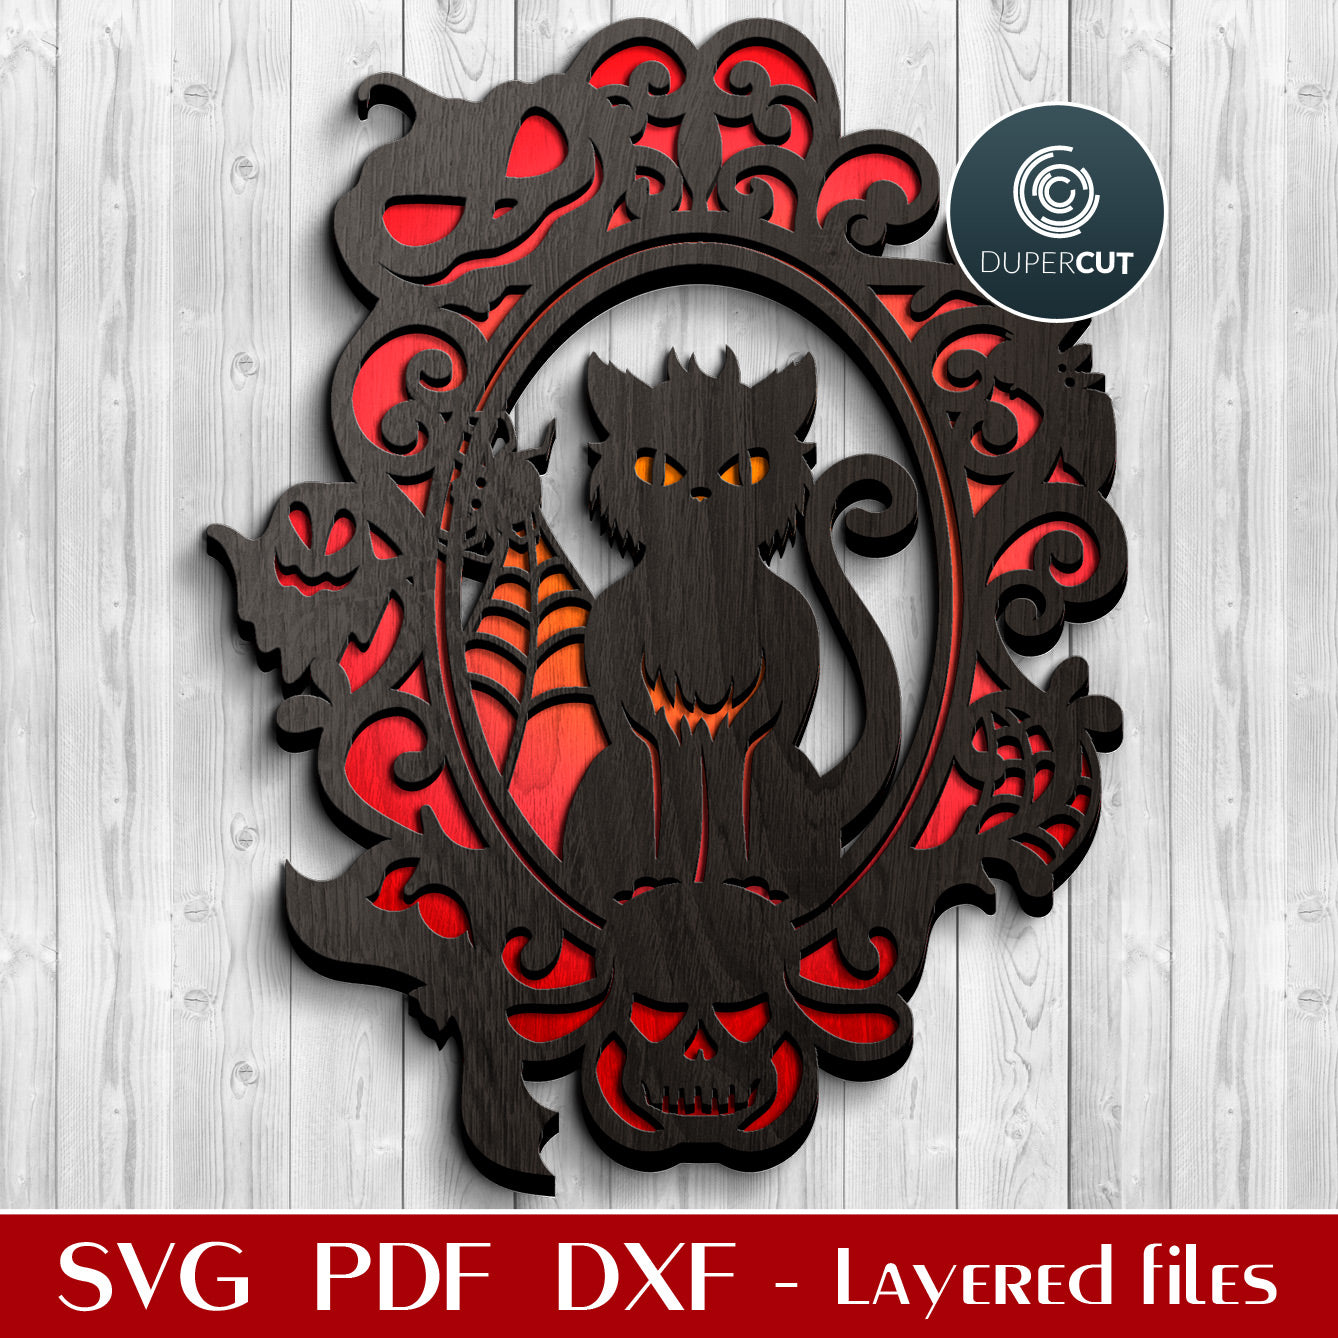 Spooky Black Cat Halloween decoration template - SVG PNG DXF layered cutting files for laser machines Glowforge, Cricut, Silhouette, CNC plasma machines by DuperCut